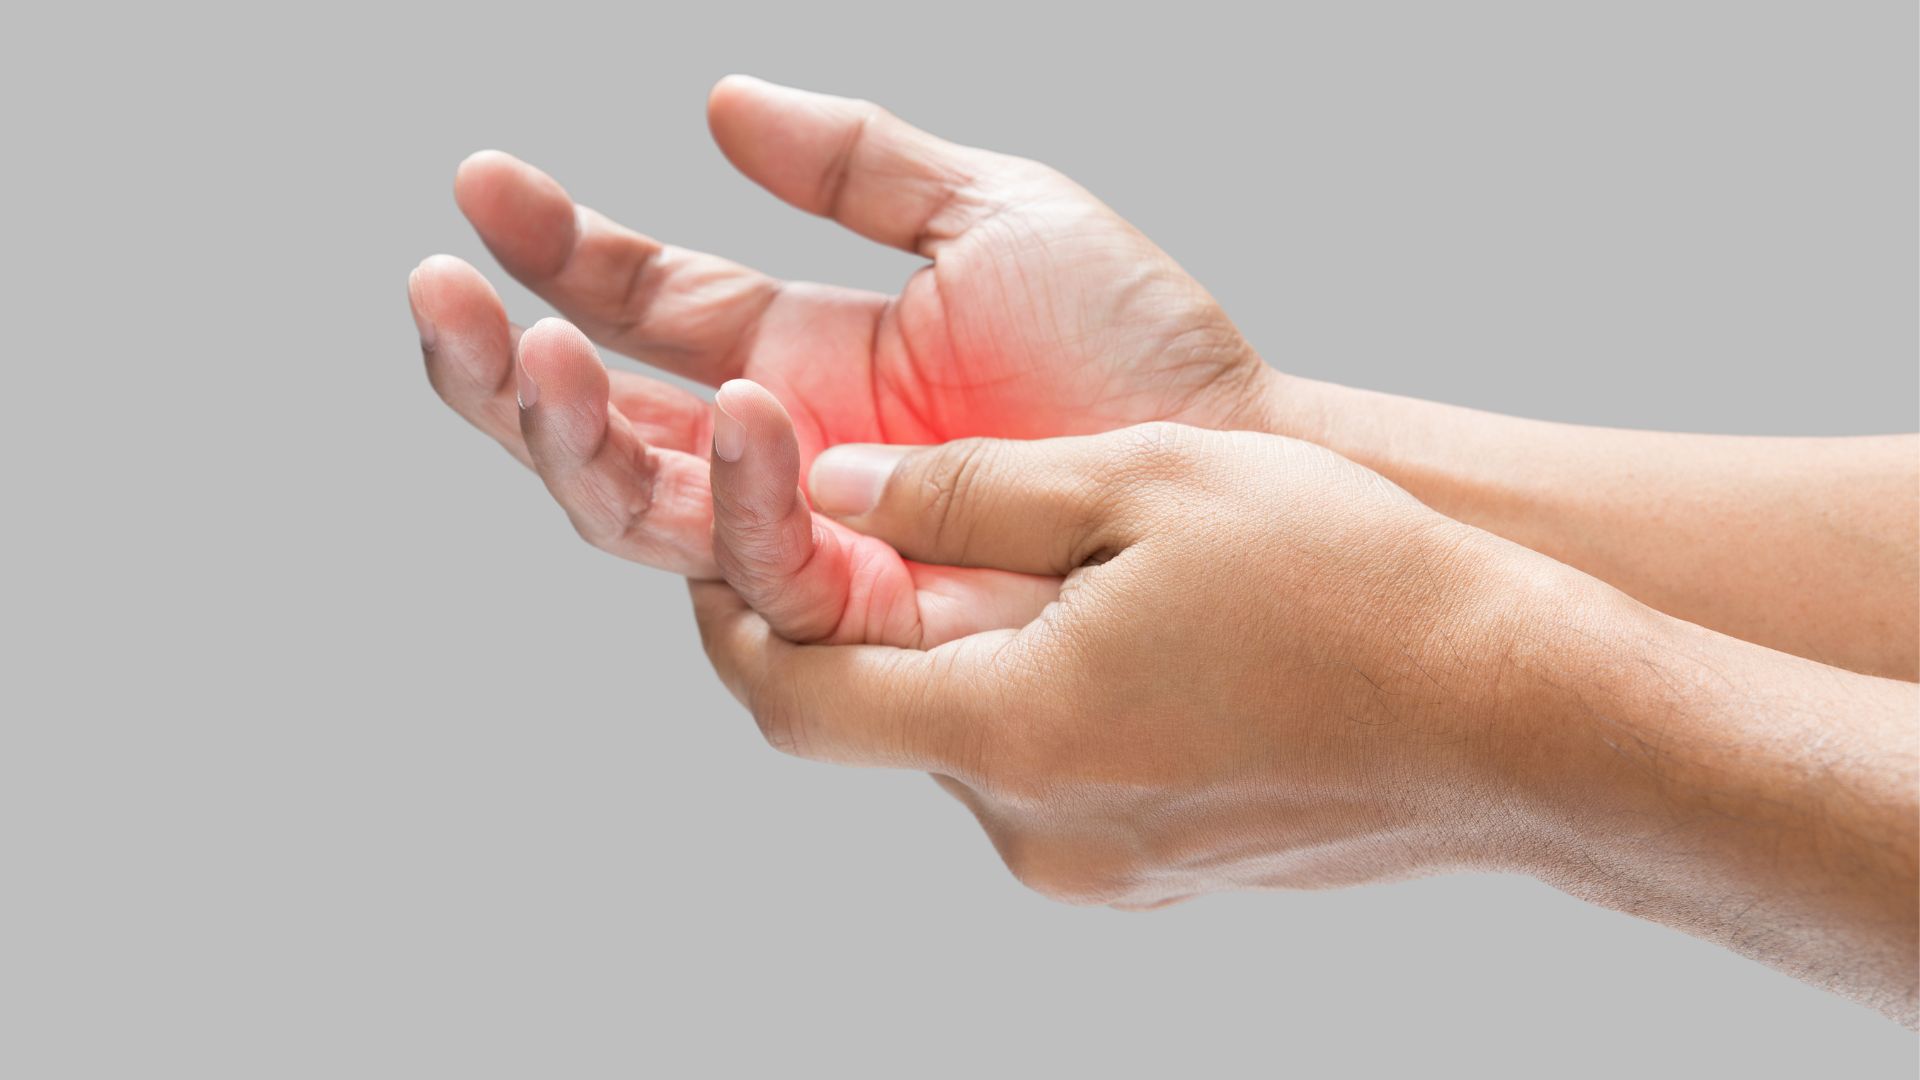 Can A Chiropractor Help With Numbness In Hands?